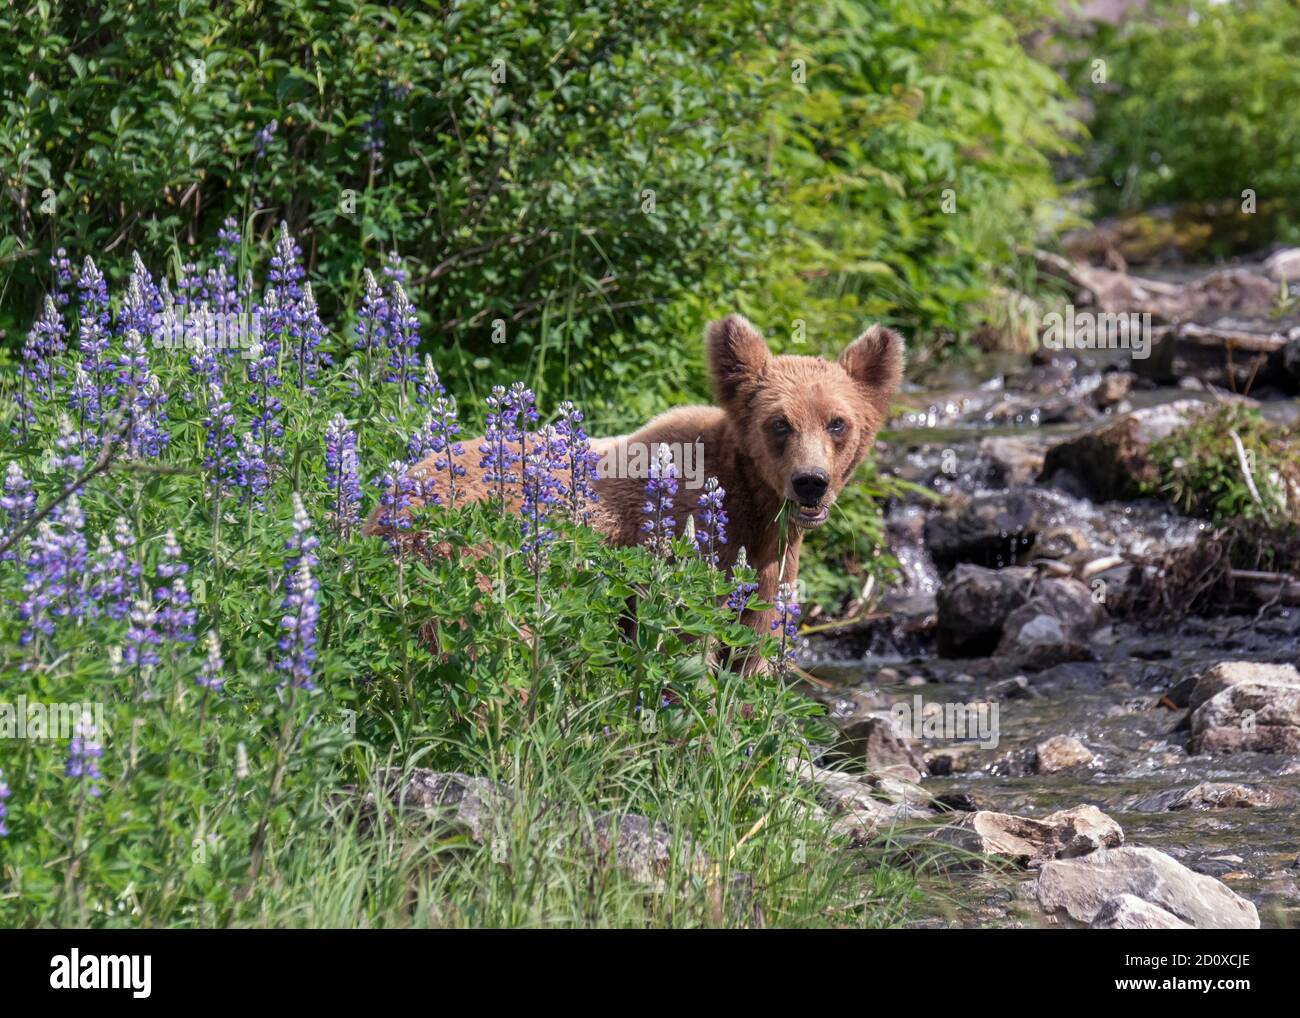 Grizzly bear cub in the wild lupine blossoms, Khutzeymateen, BC Stock Photo